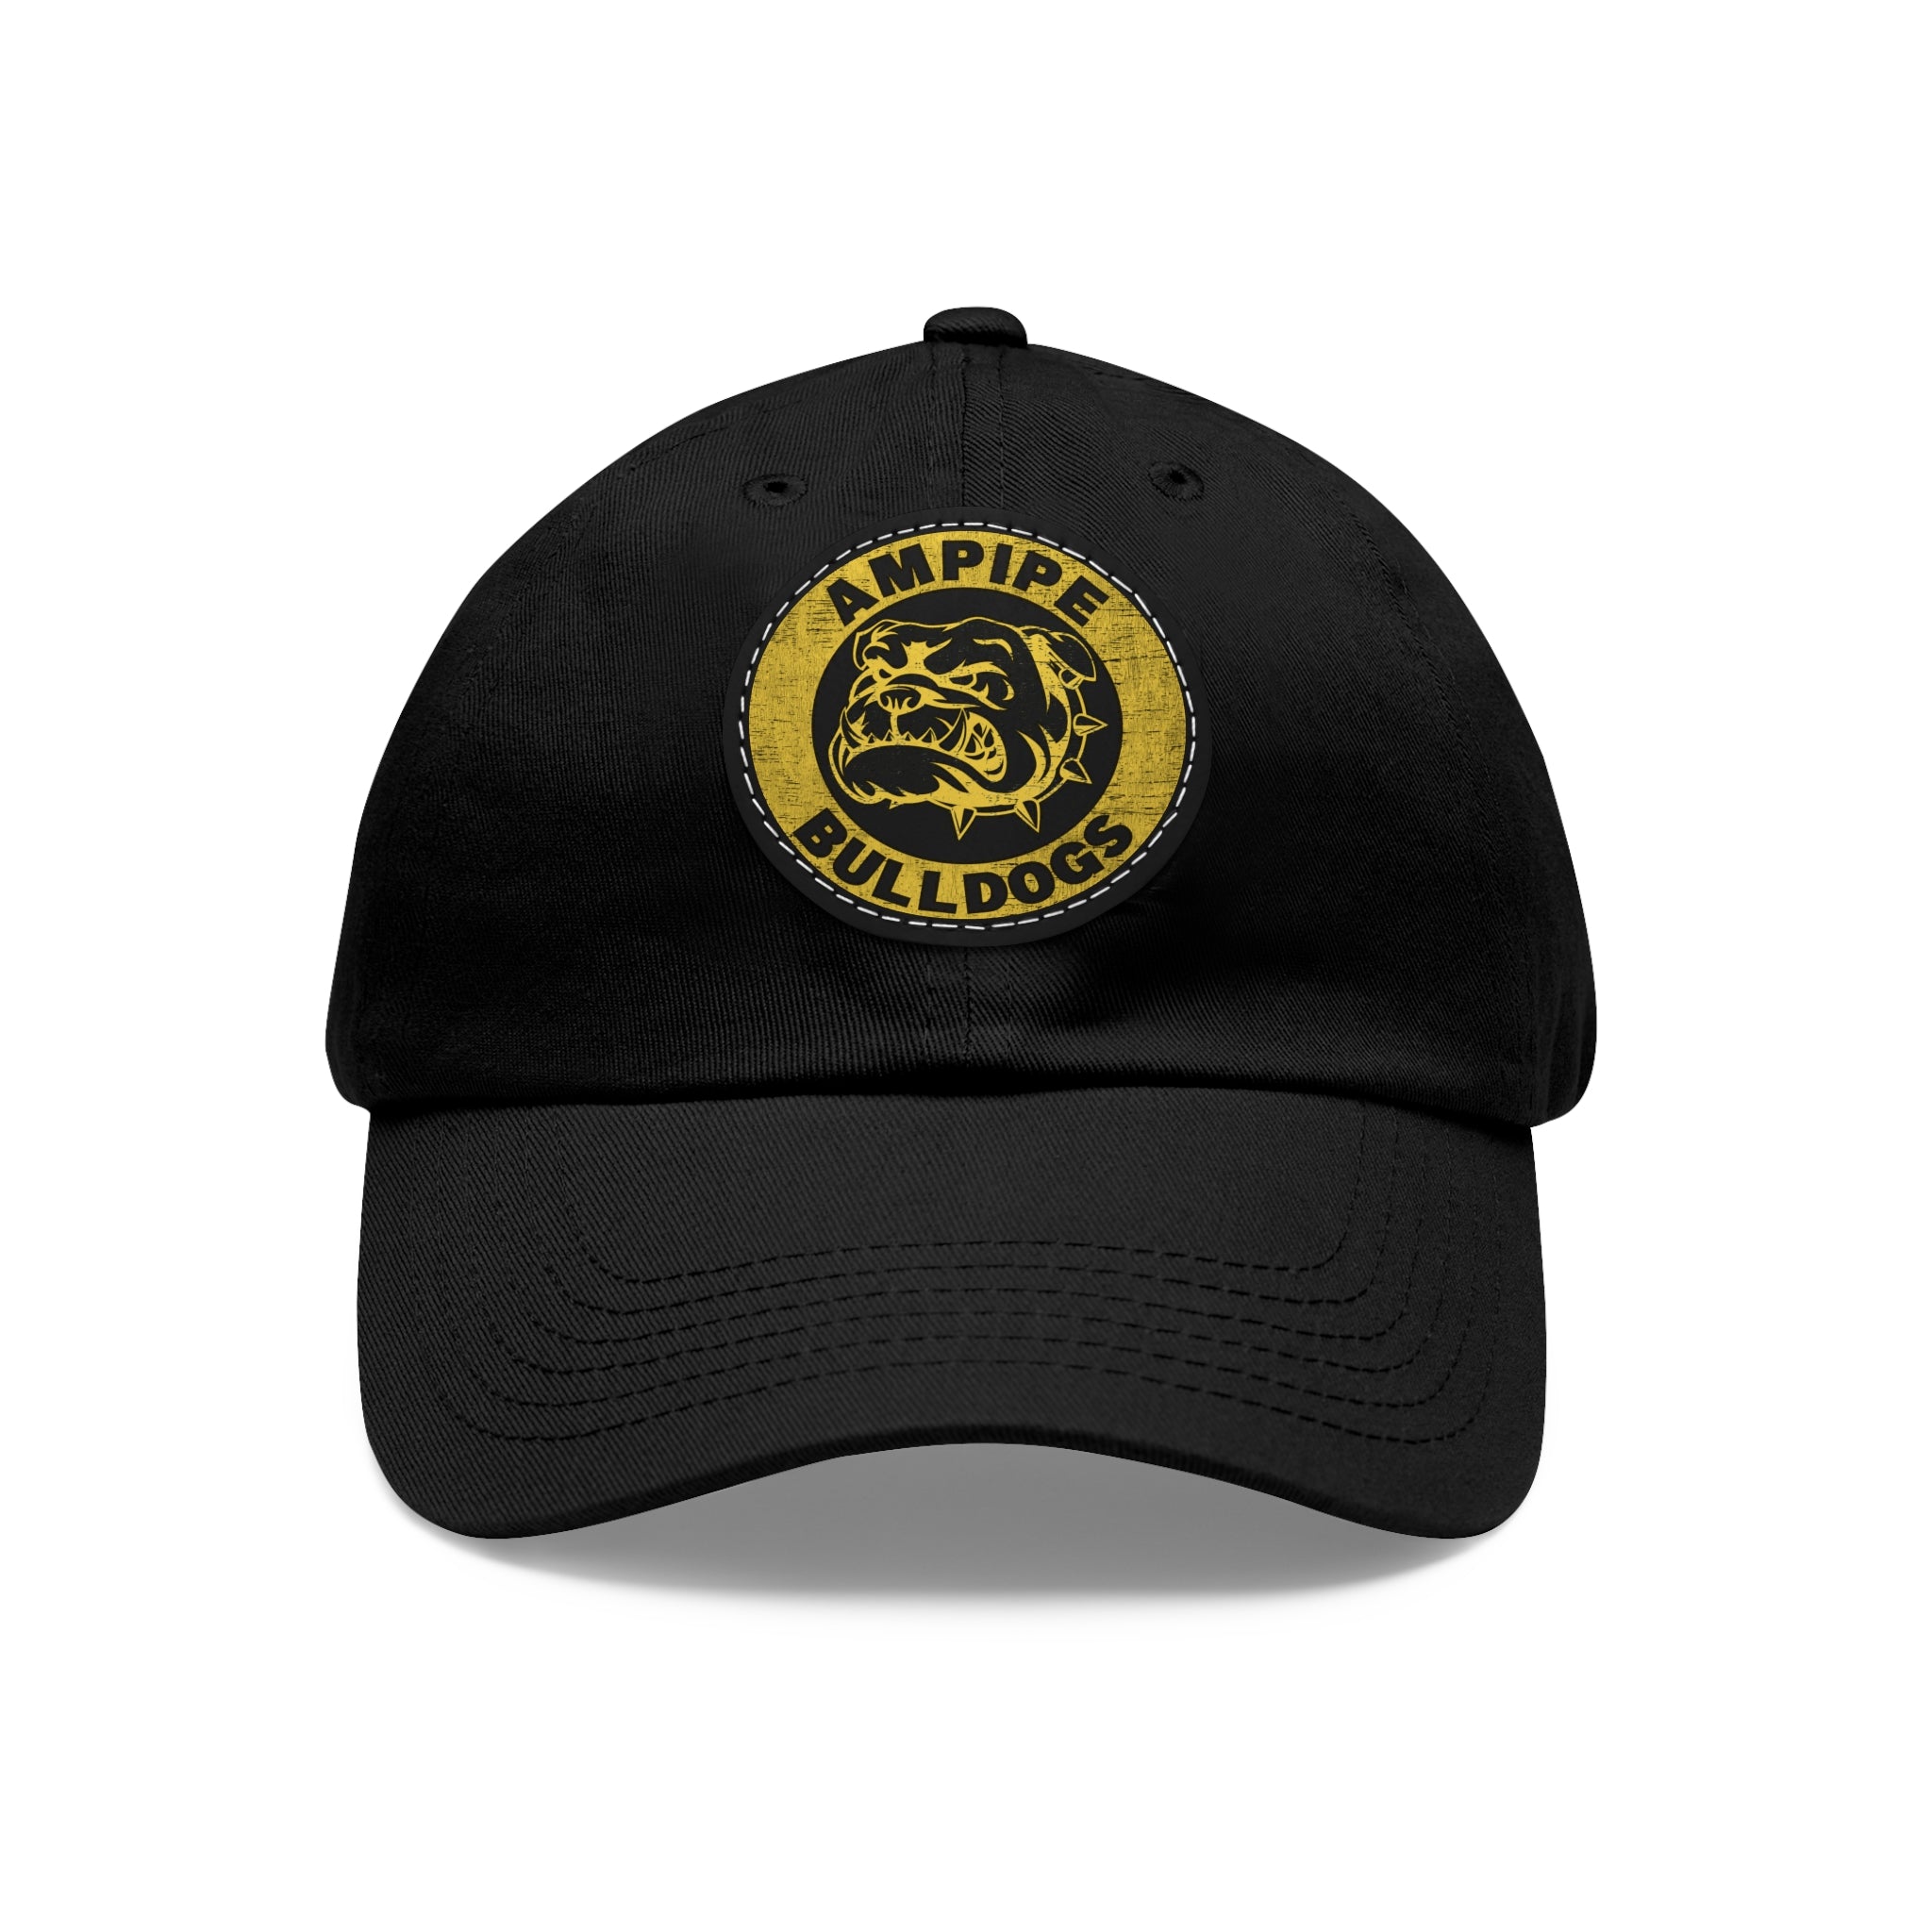 Ampipe Bulldogs (All the Right Moves) - Printed Patch Dad Hat - Yinzylvania